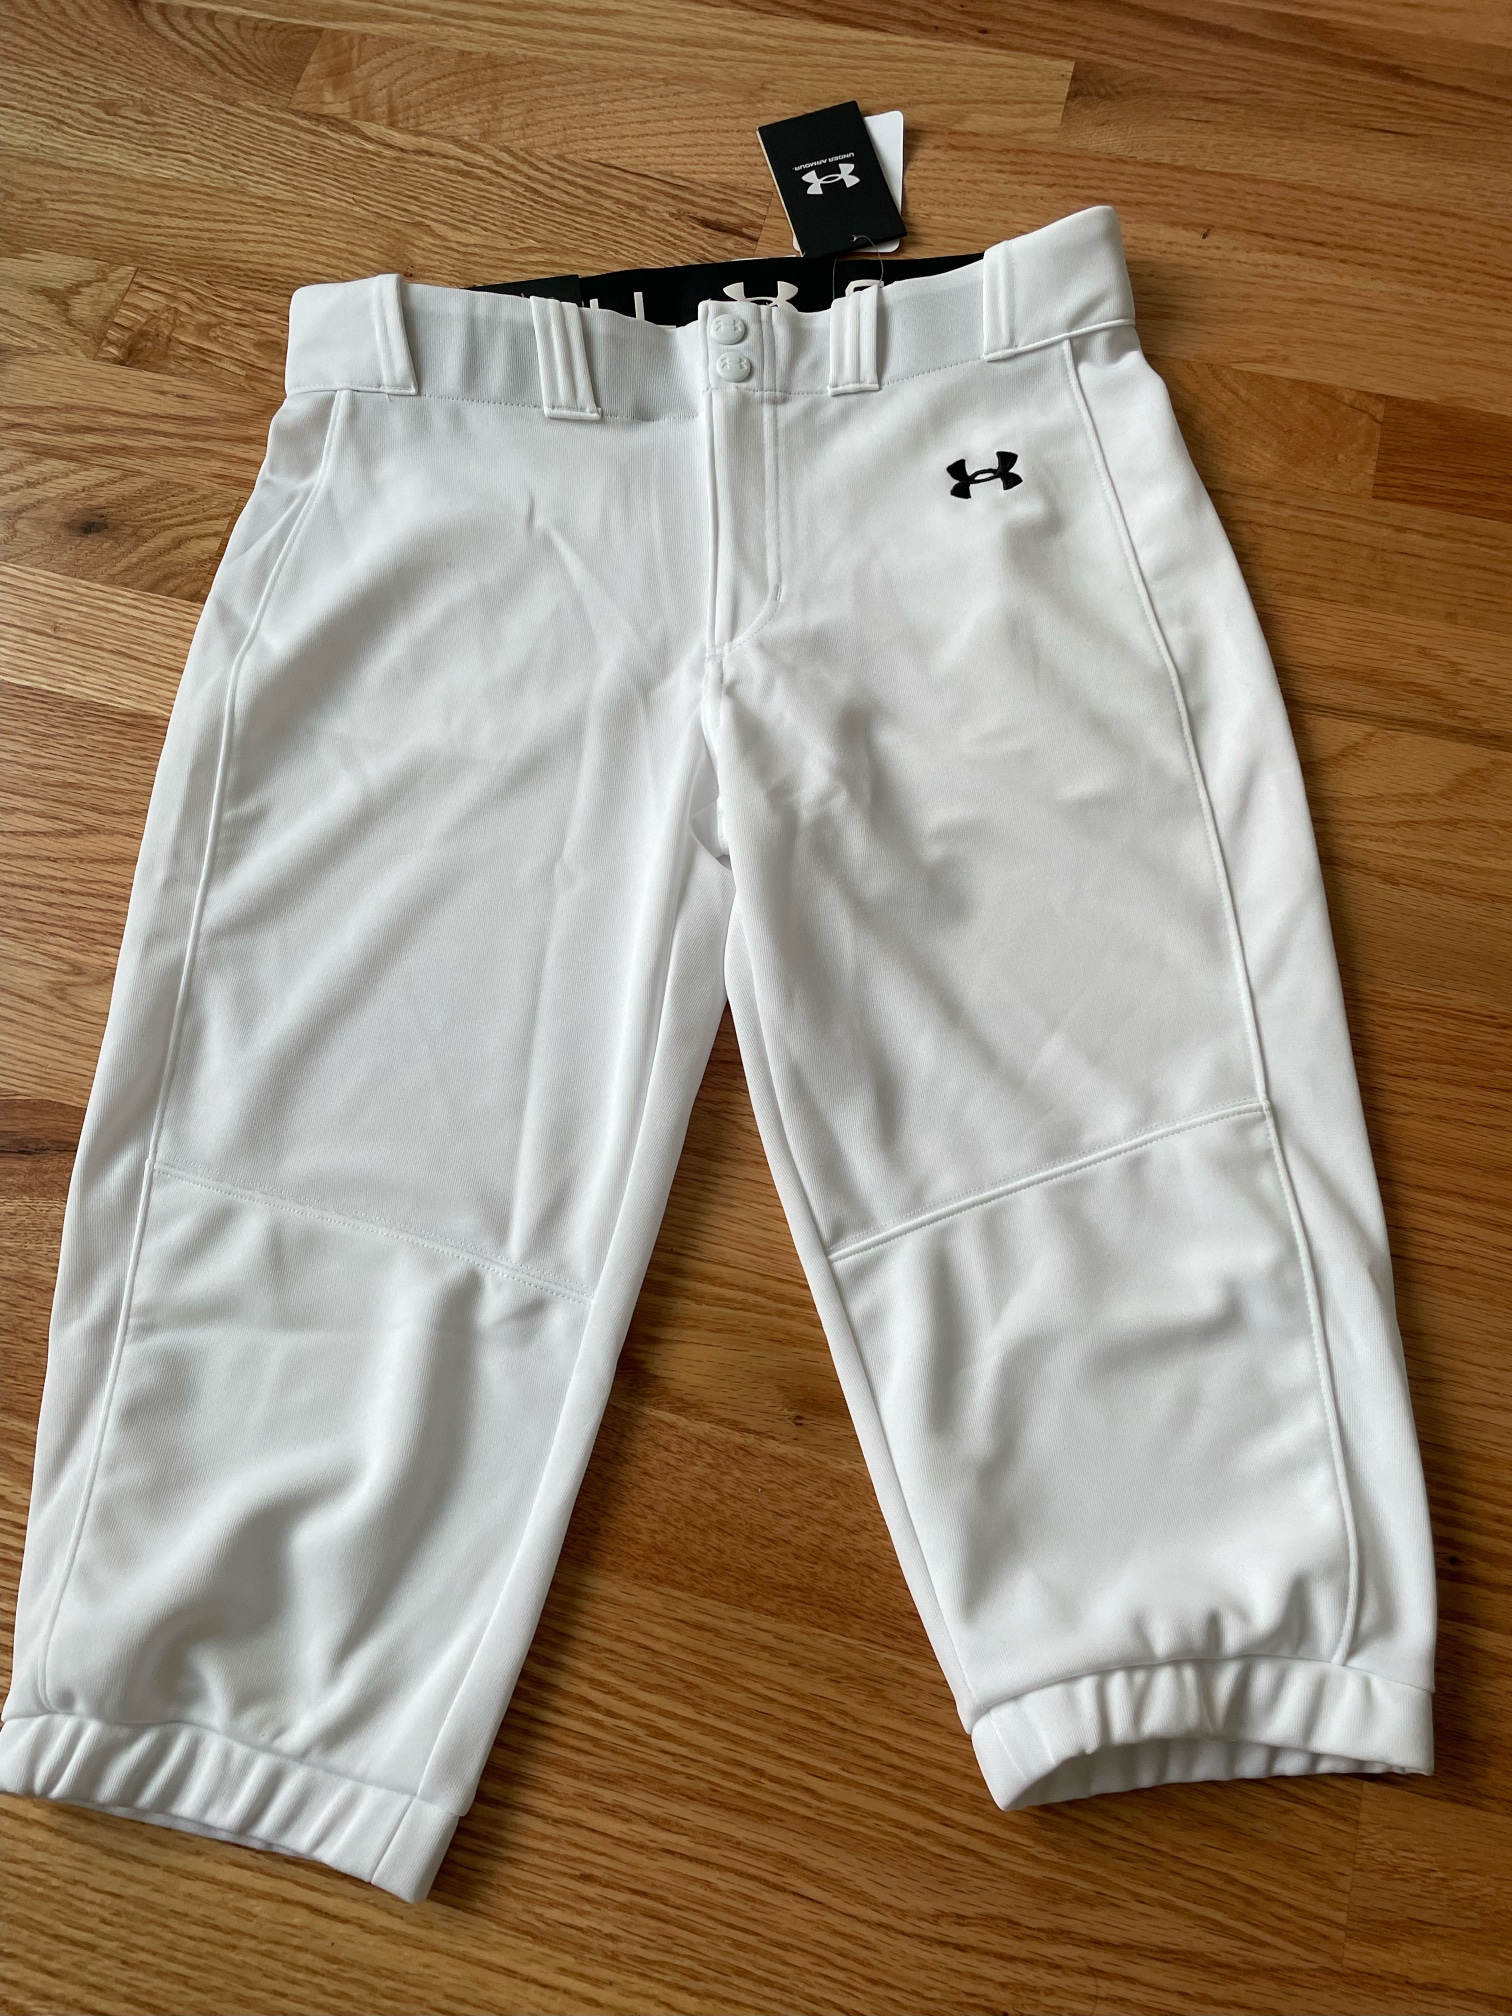 White Youth Girl's New Large Adidas Game Pants (New with Tags)